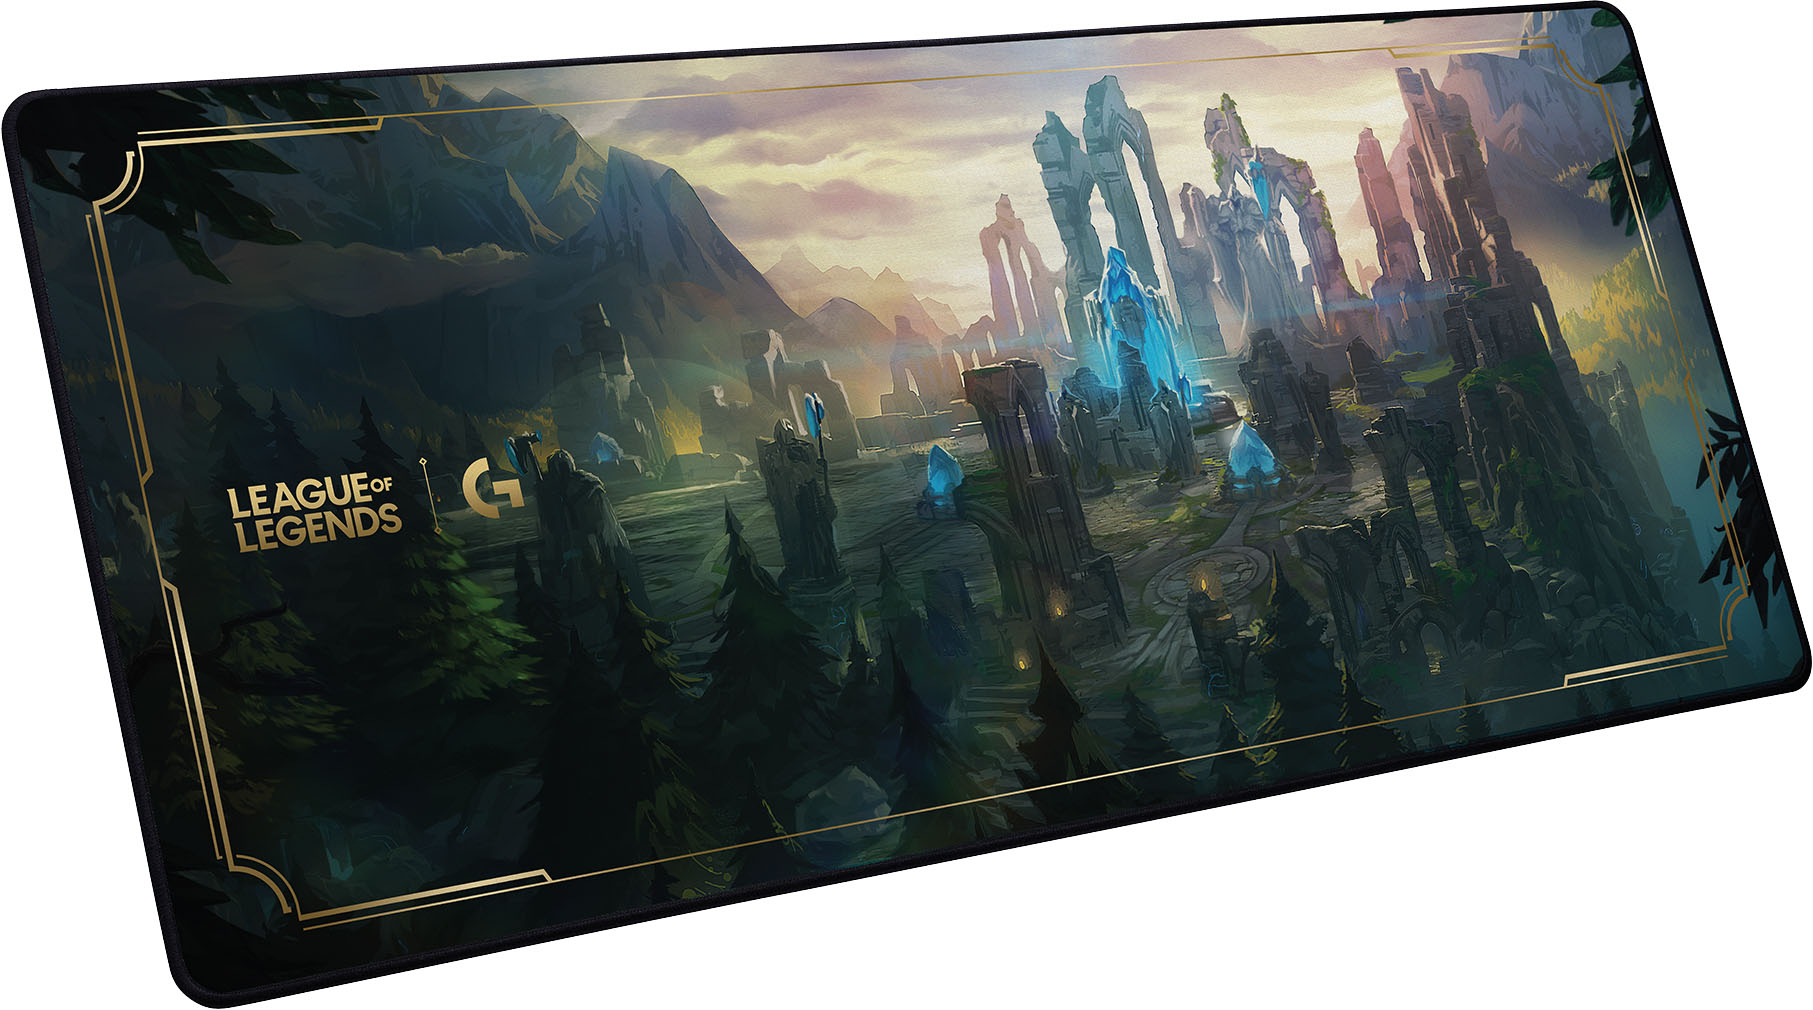 Logitech Gaming Mouse Pad with Base (Extra Large) League of Legends Edition, Multi - Best Buy